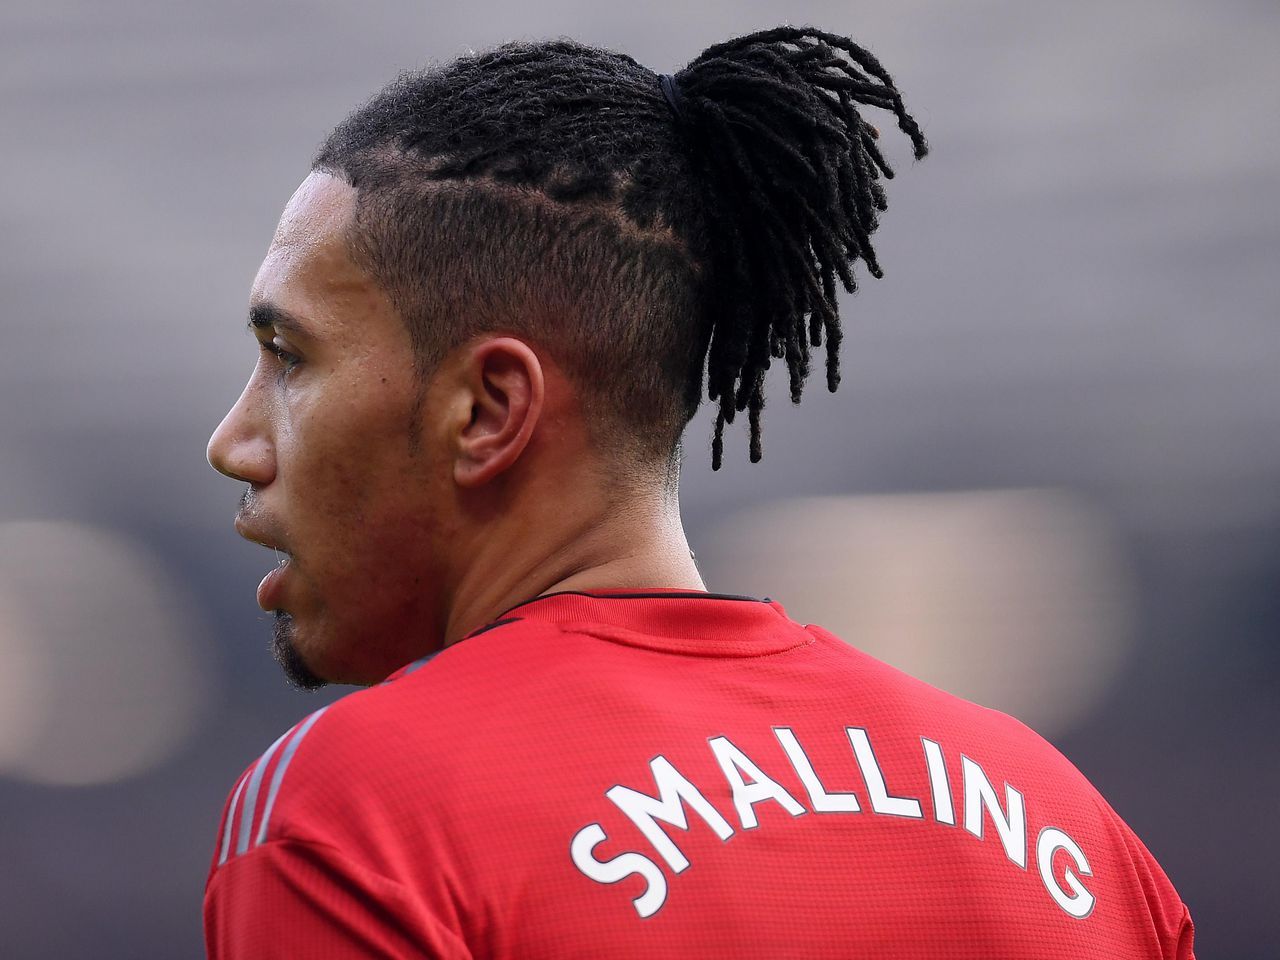 Chris Smalling: Old Trafford could determine Man United's season